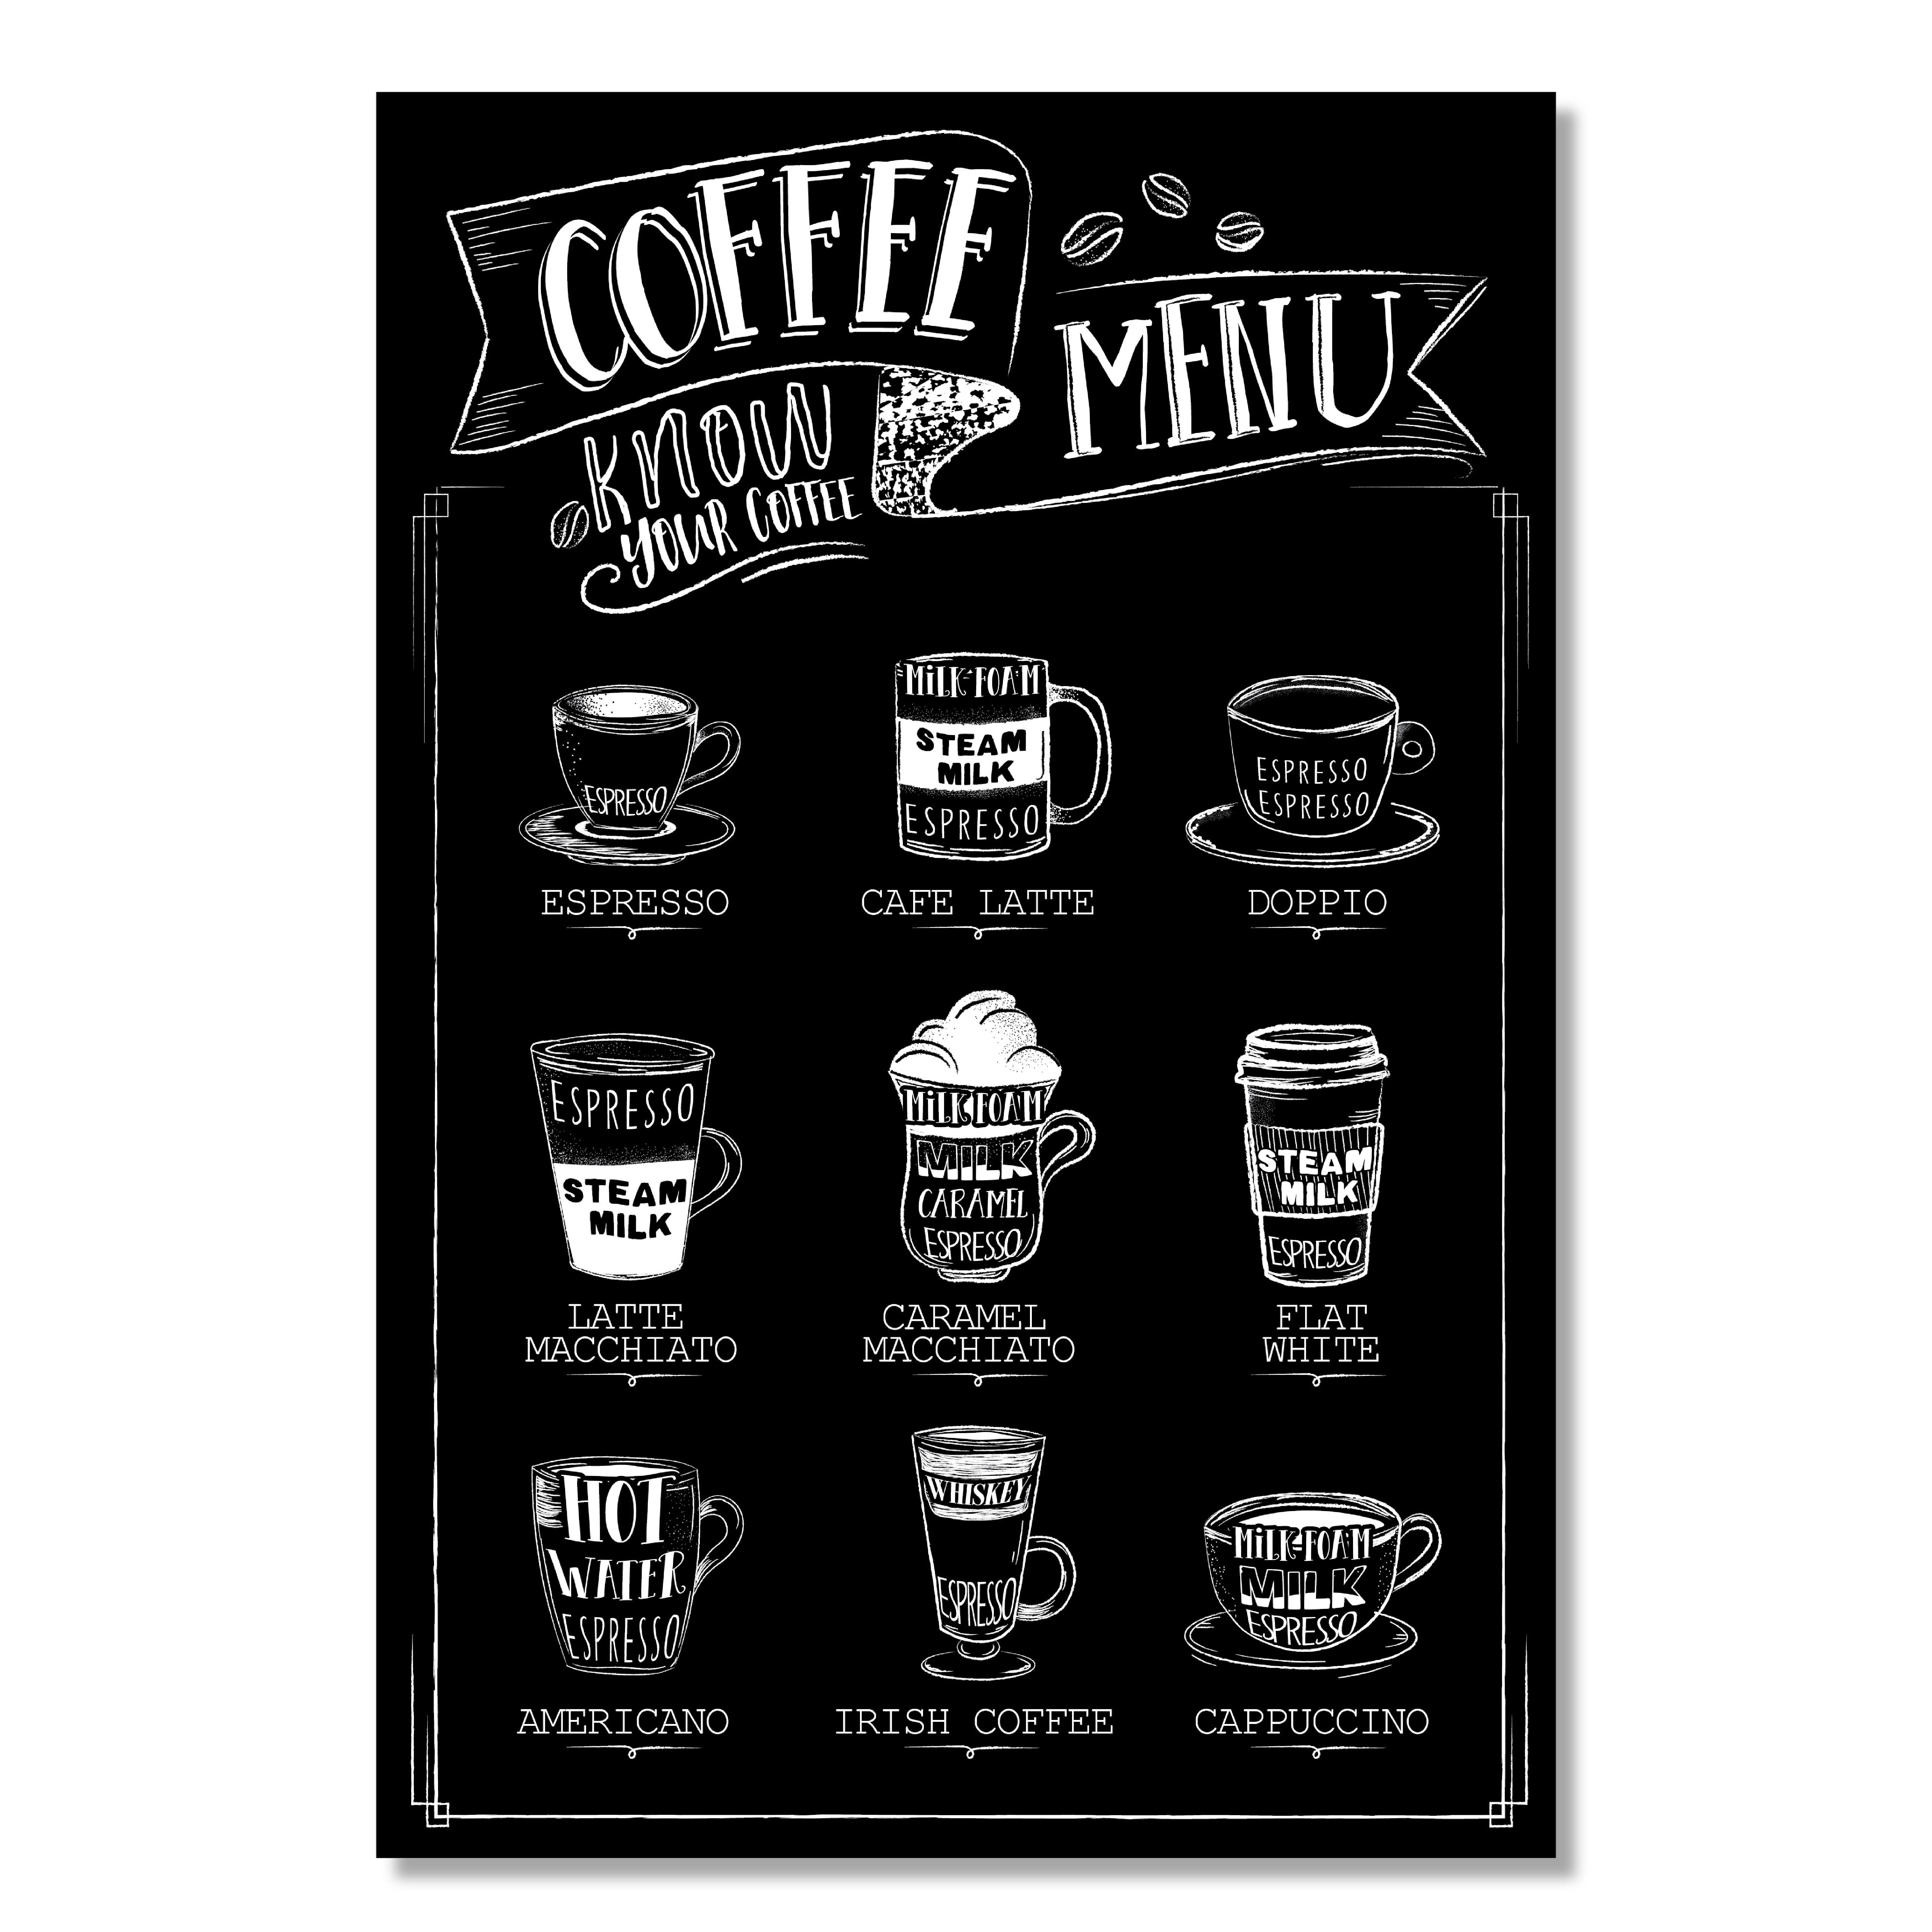 DL-CAFE MENU KNOW YOUR COFFEE TIN SIGN Old Wall Metal Painting ART Decor 